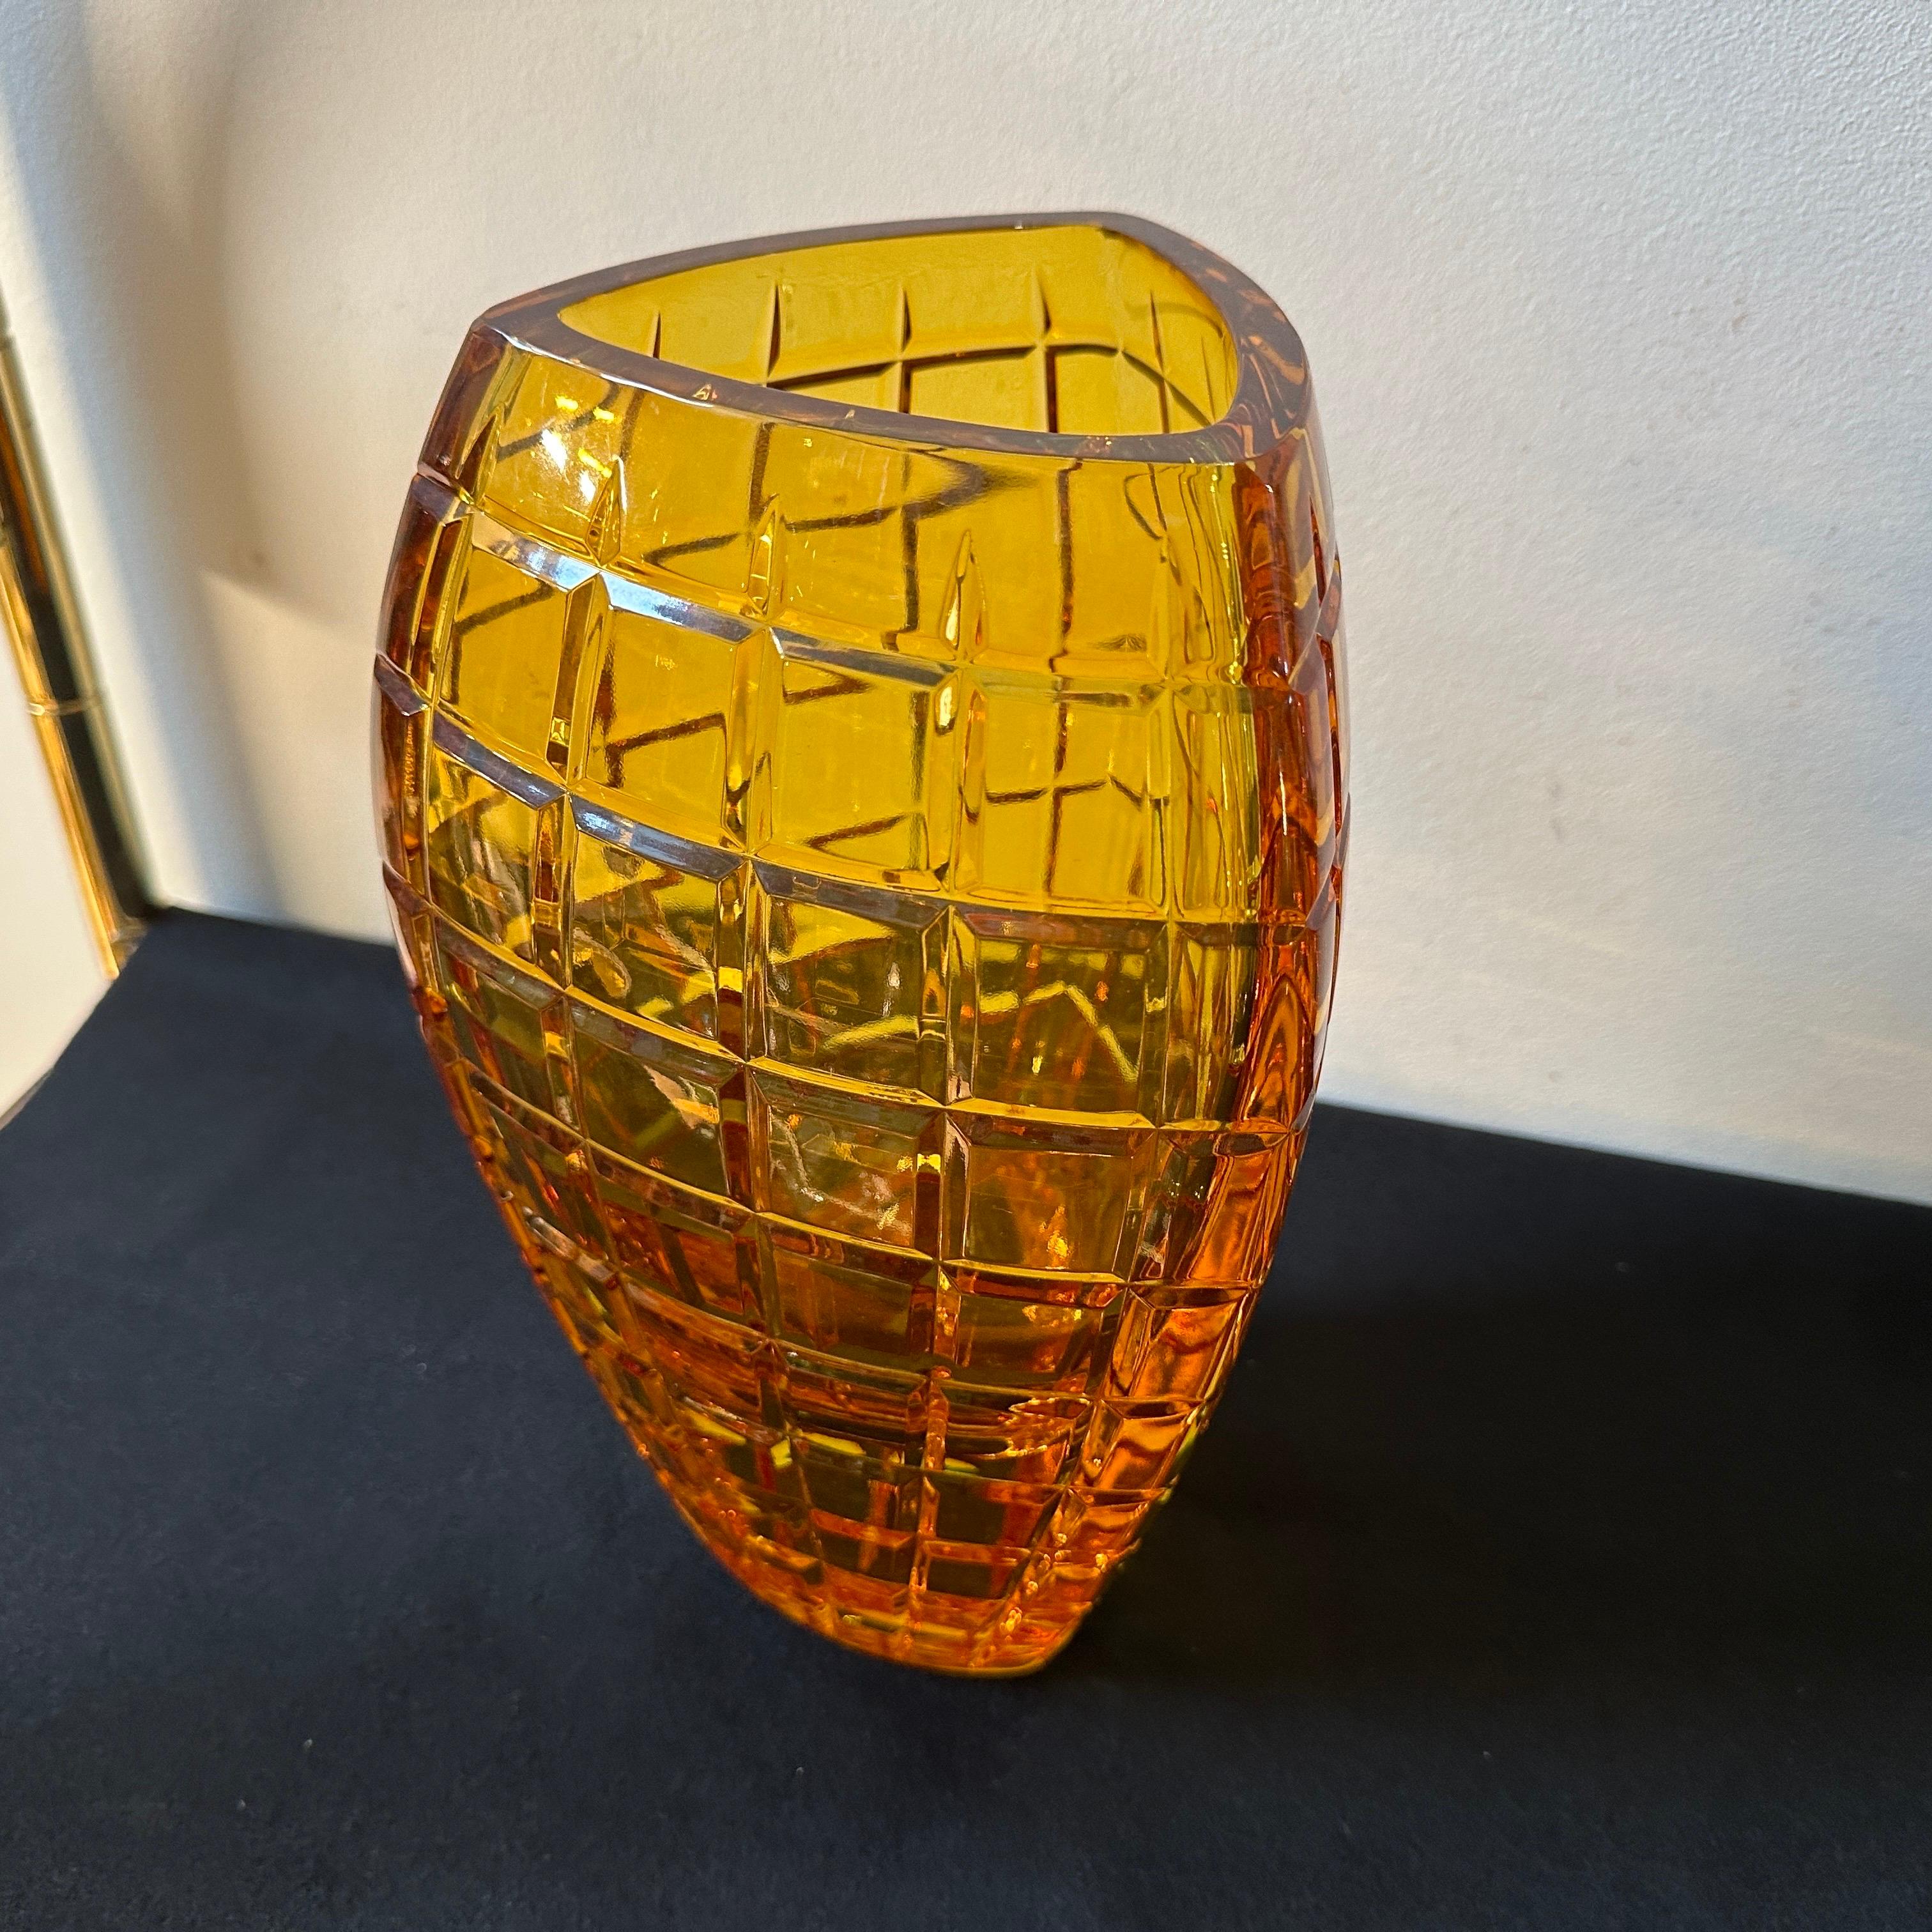 This Belgian Vase by Val Saint Lambert is a stunning example of mid-century design and craftsmanship. Its unique combination of form, color, and texture makes it a striking centerpiece that adds elegance and sophistication to any interior space. 